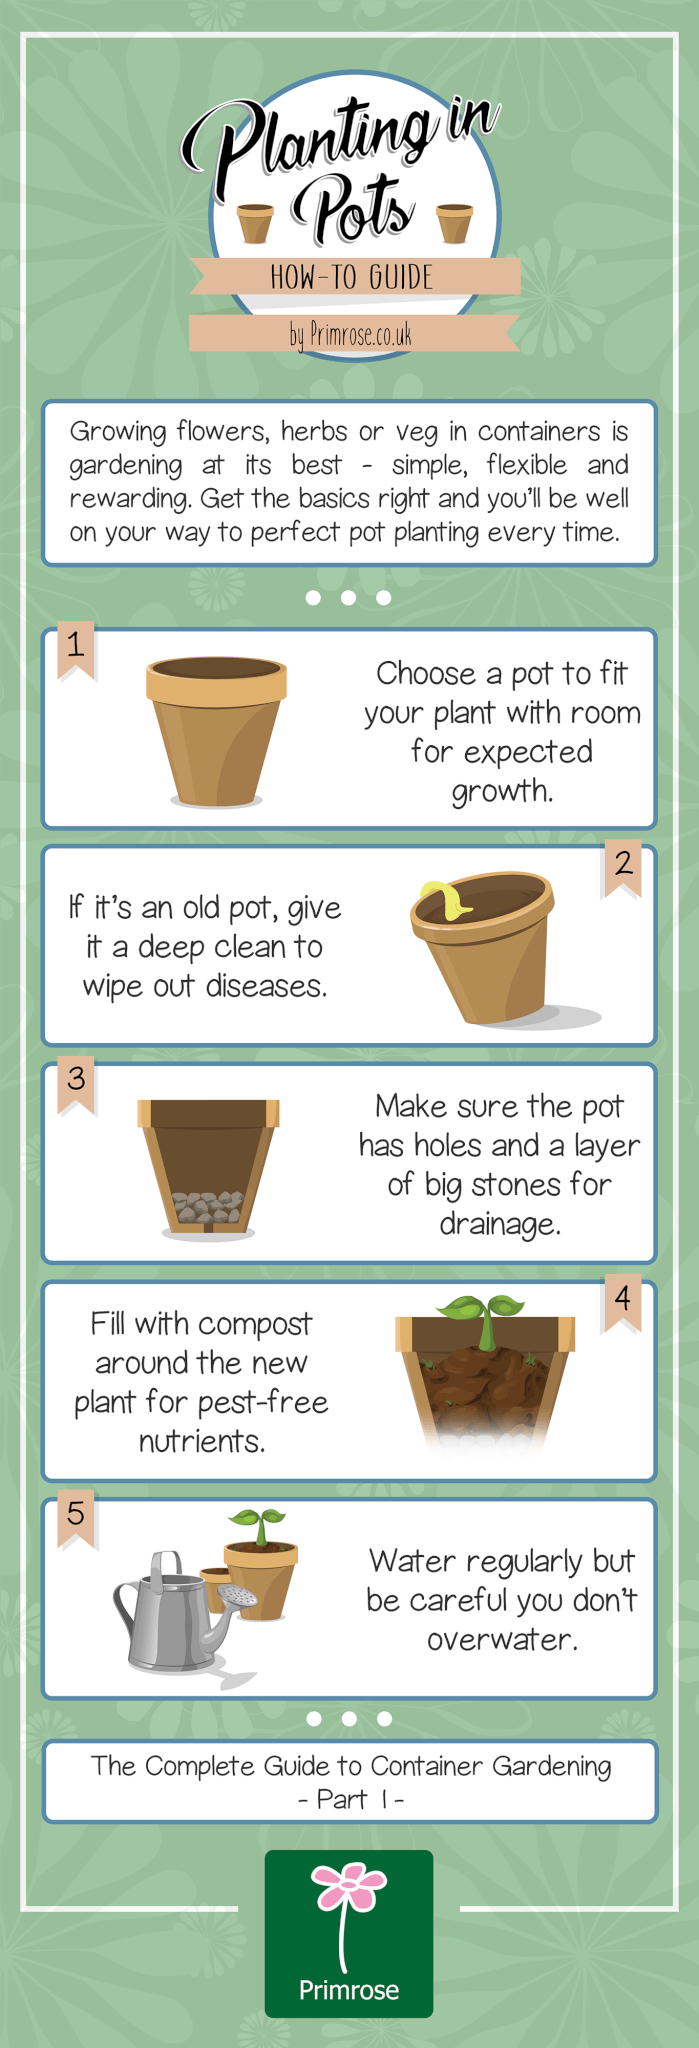 How to plant in pots infographic